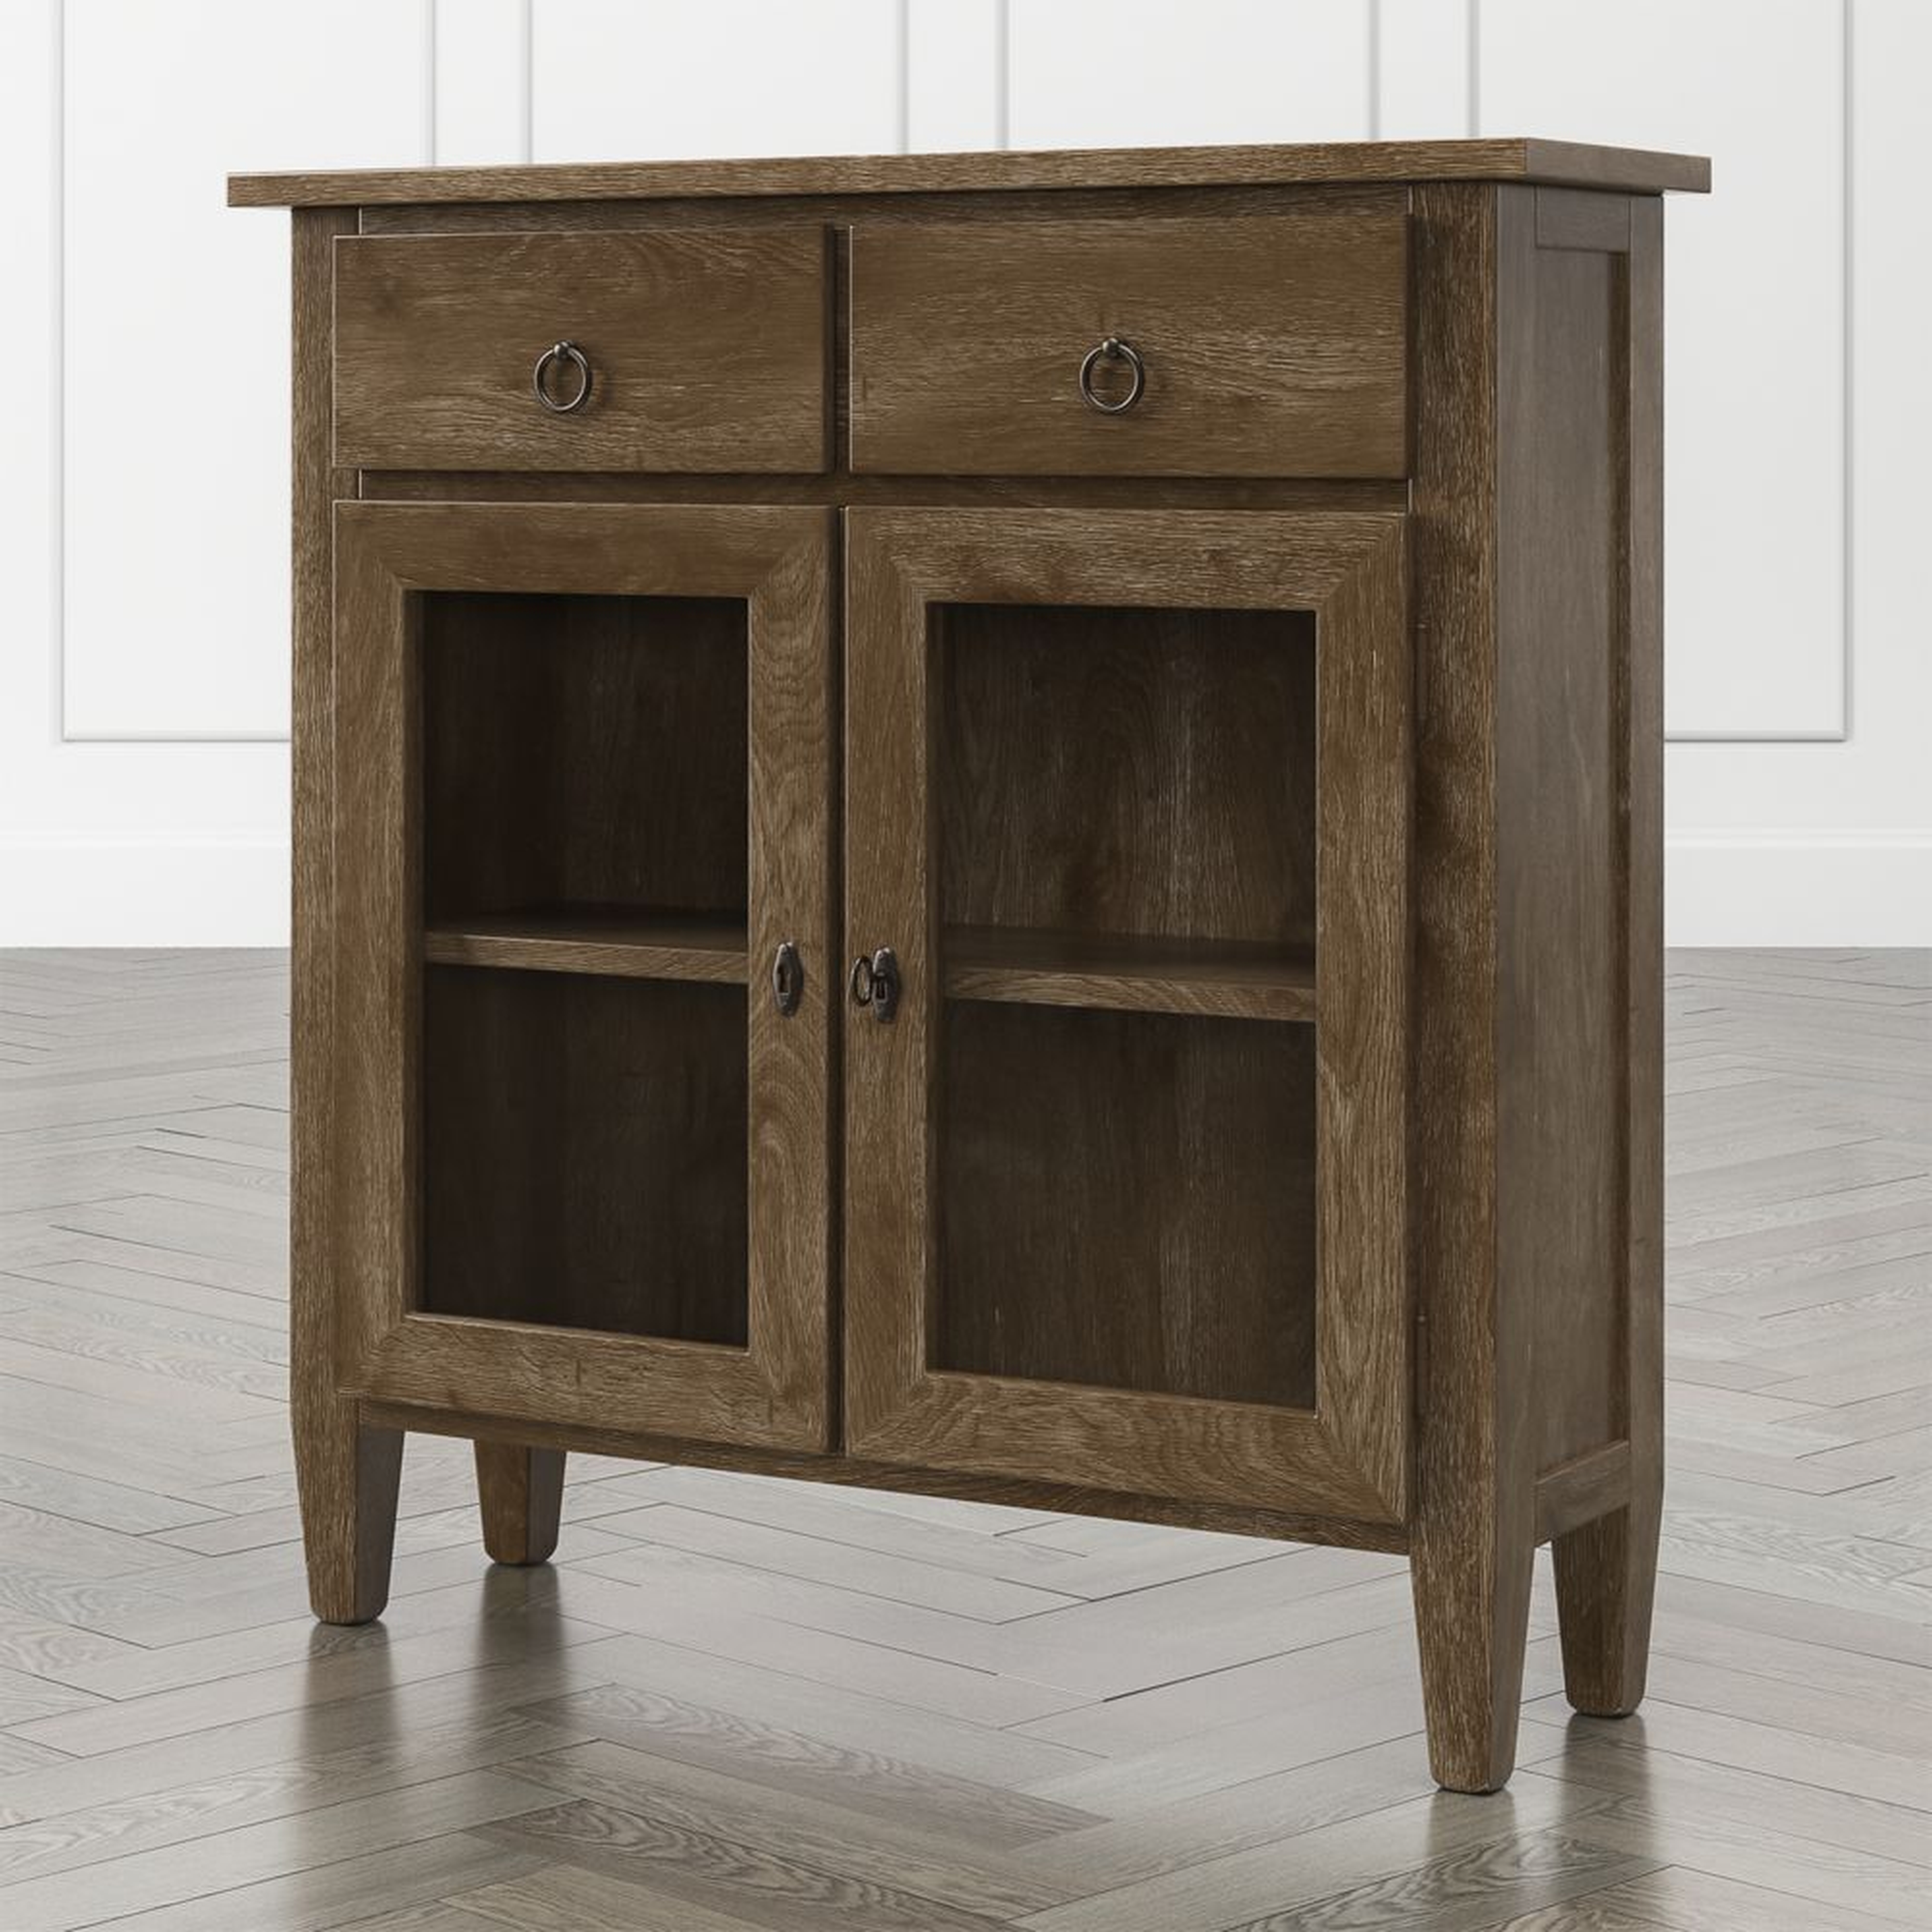 Stretto Nero Noce Entryway Cabinet - Crate and Barrel